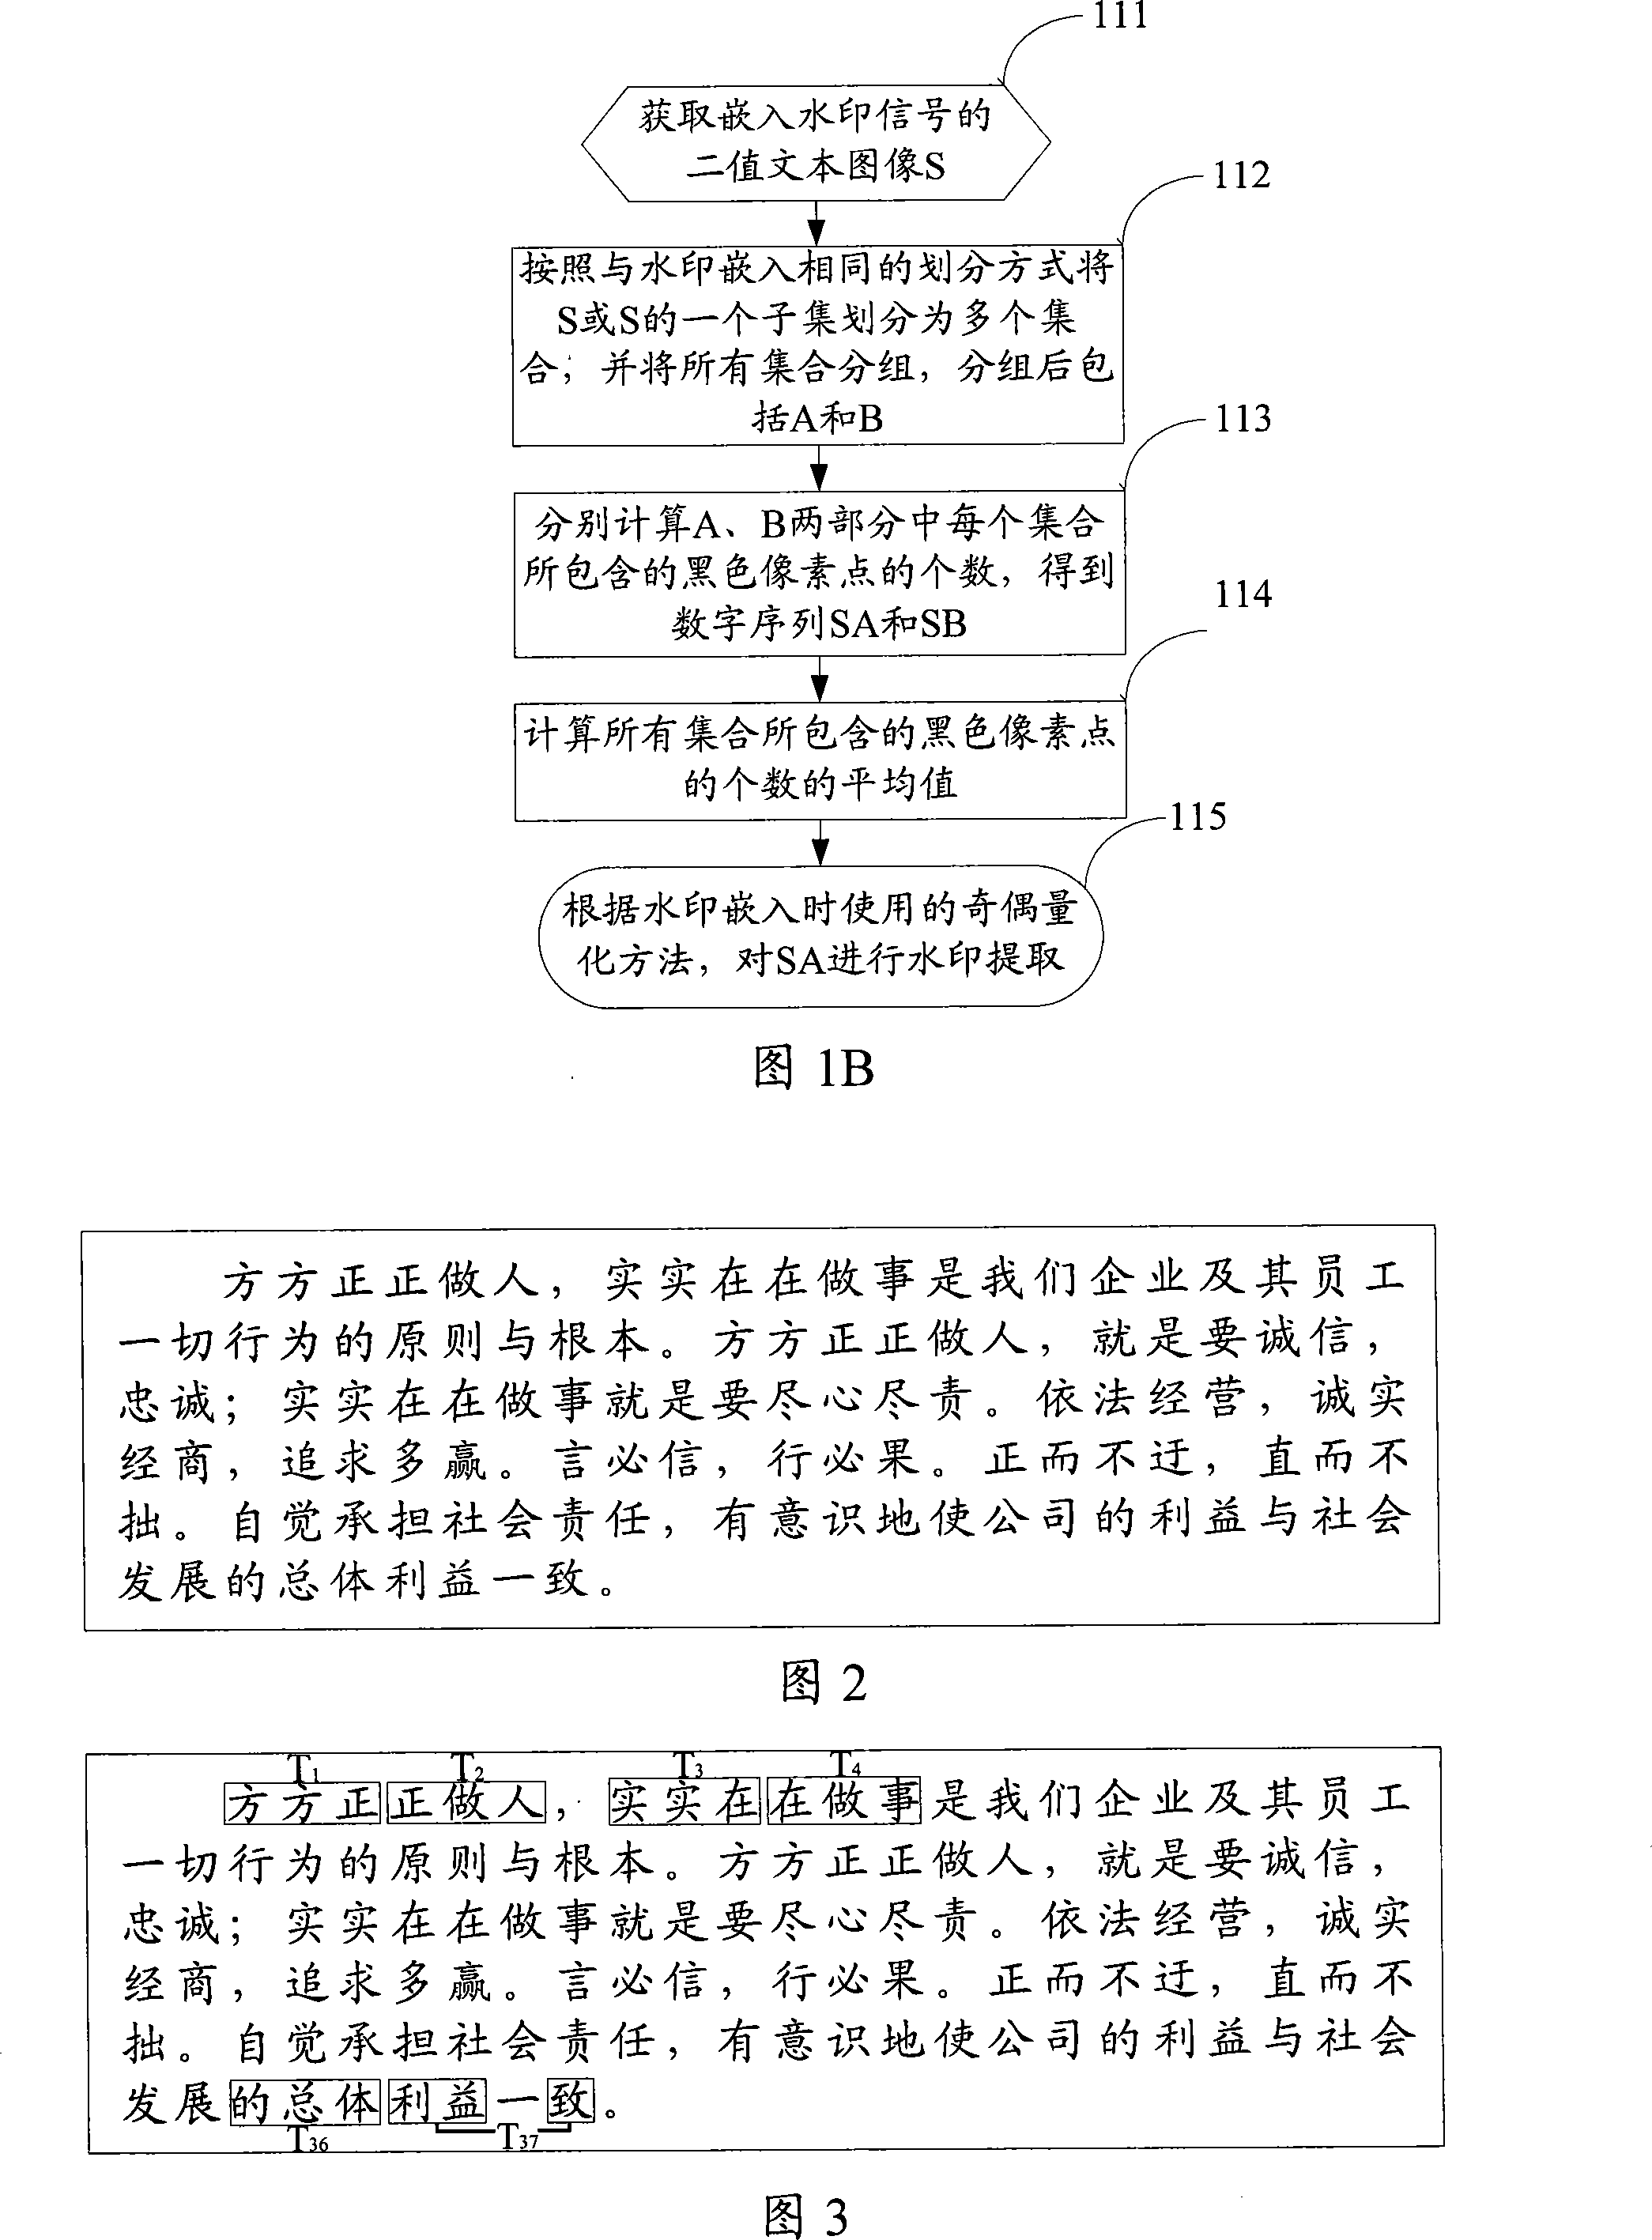 Apparatus and method for abstracting and imbedding digital watermarking in two value text image